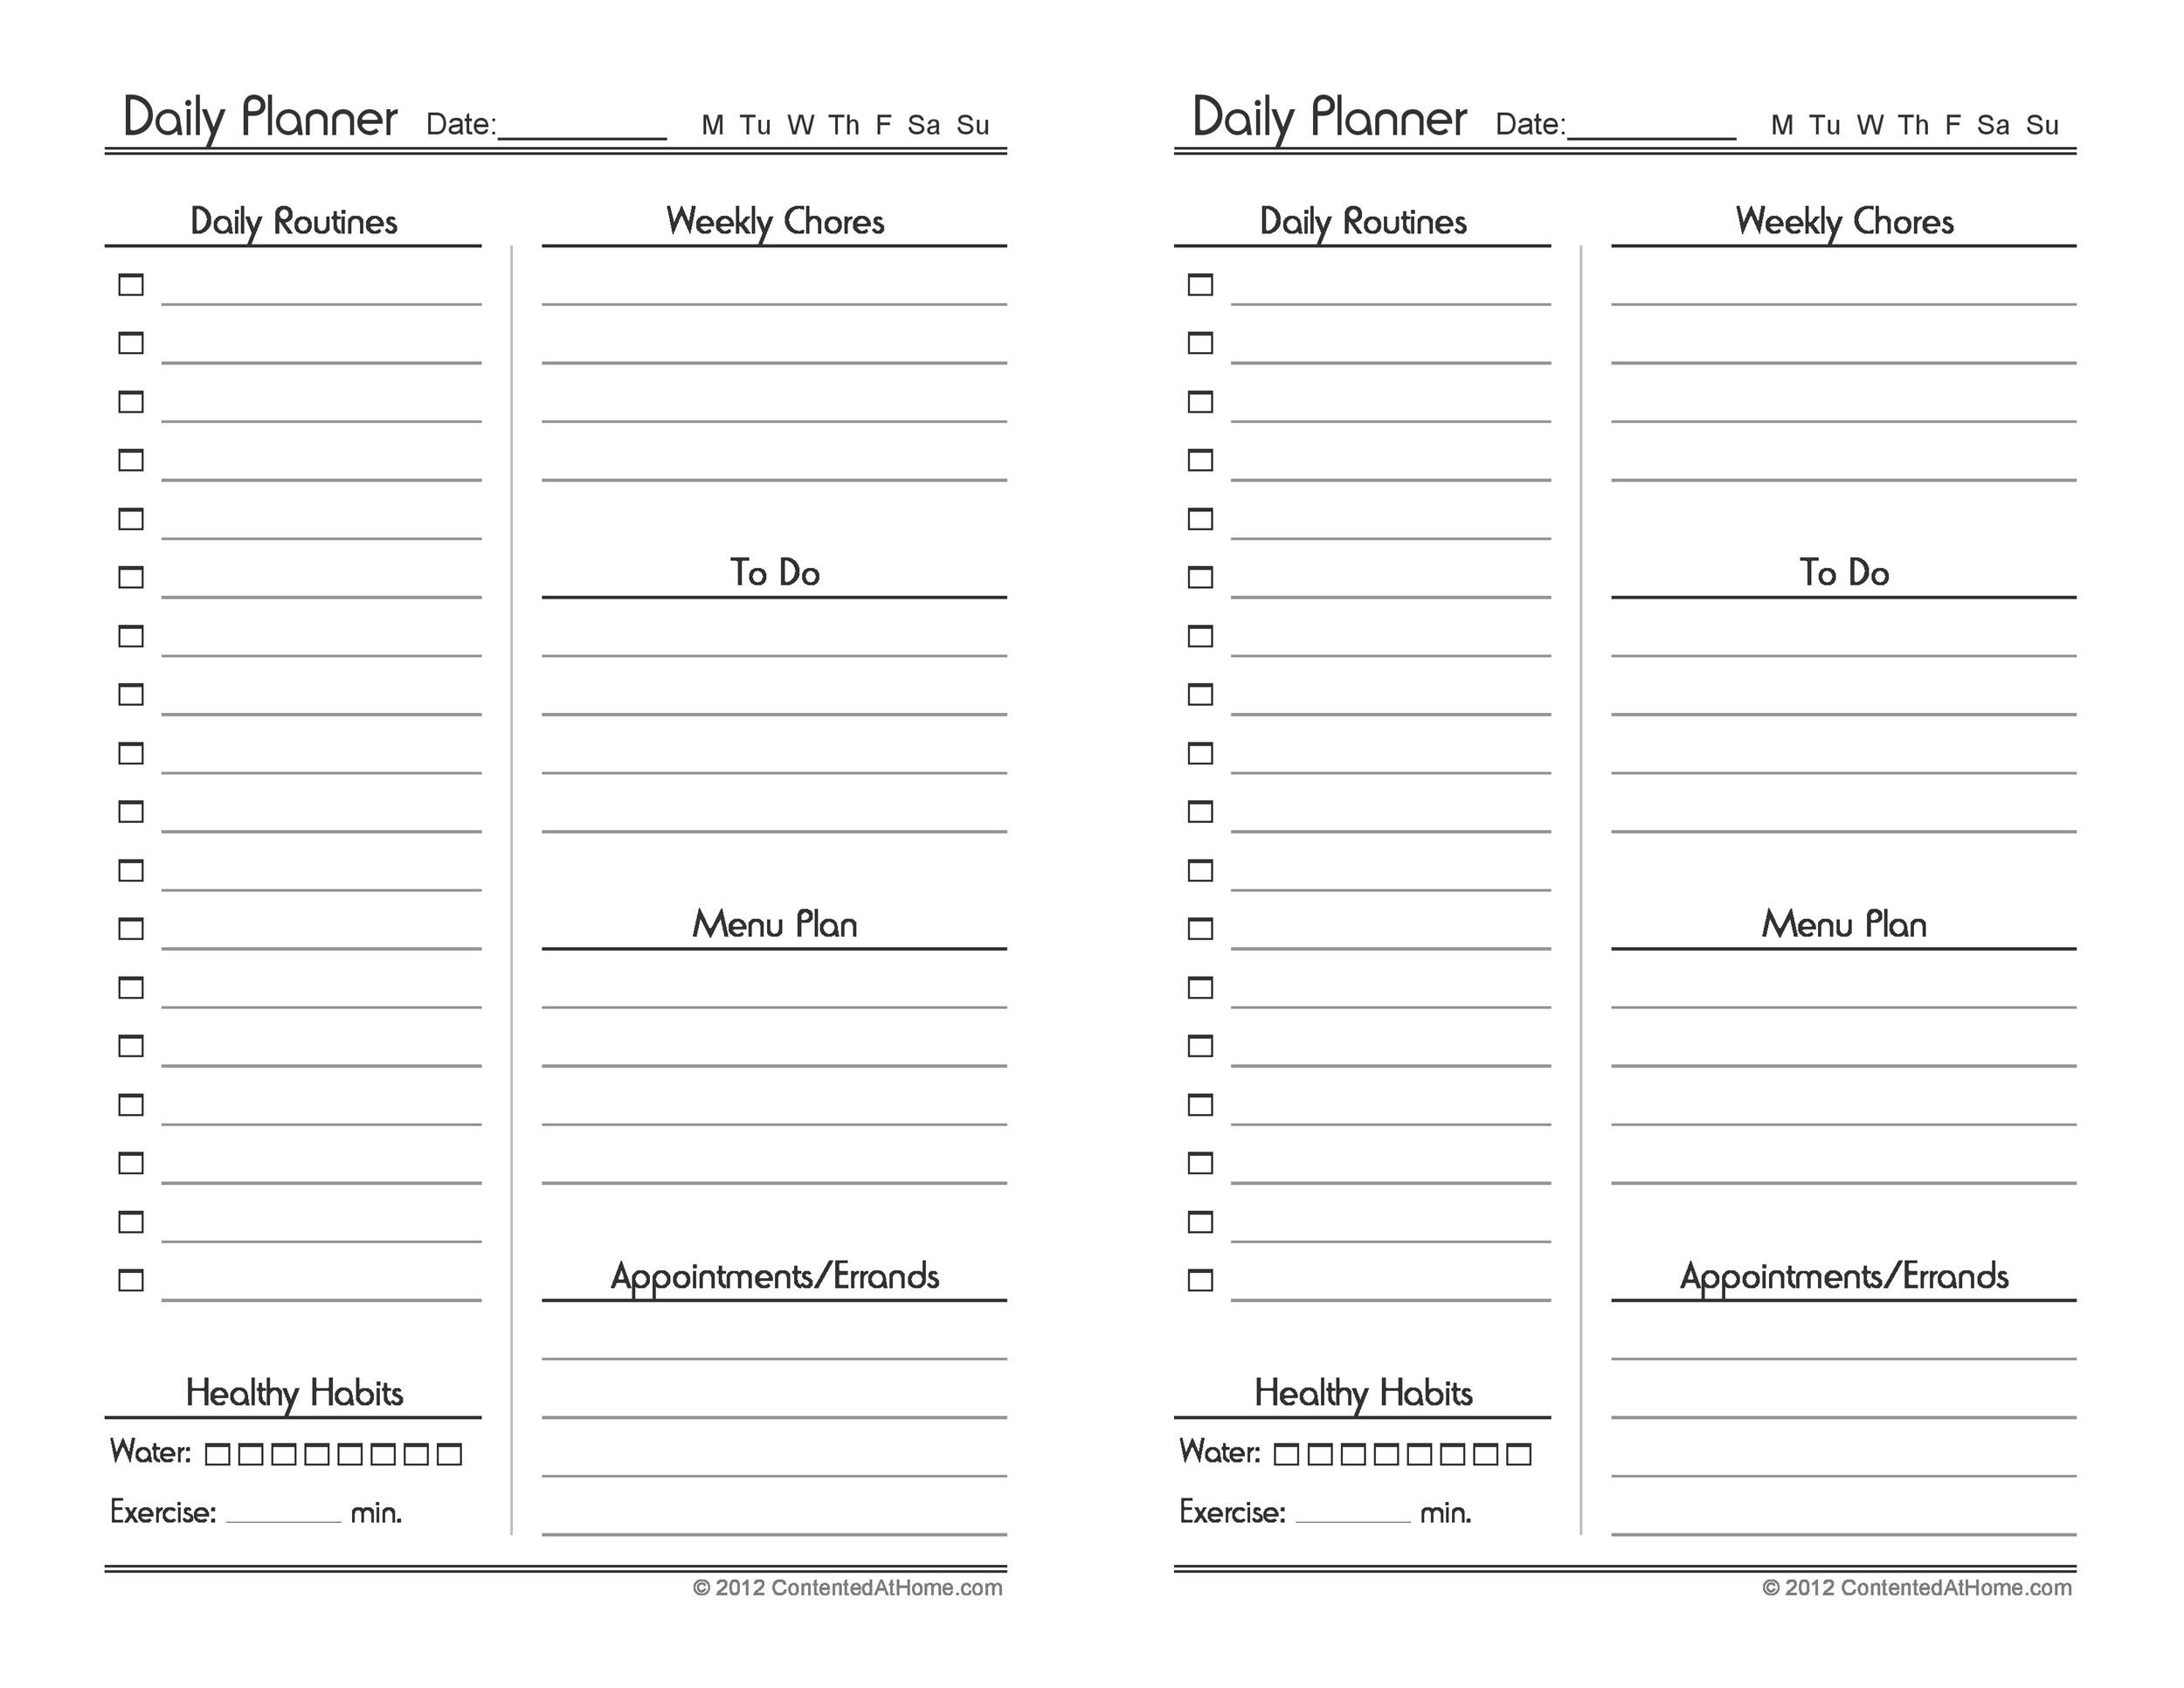 47 Printable Daily Planner Templates (FREE in Word/Excel/PDF)